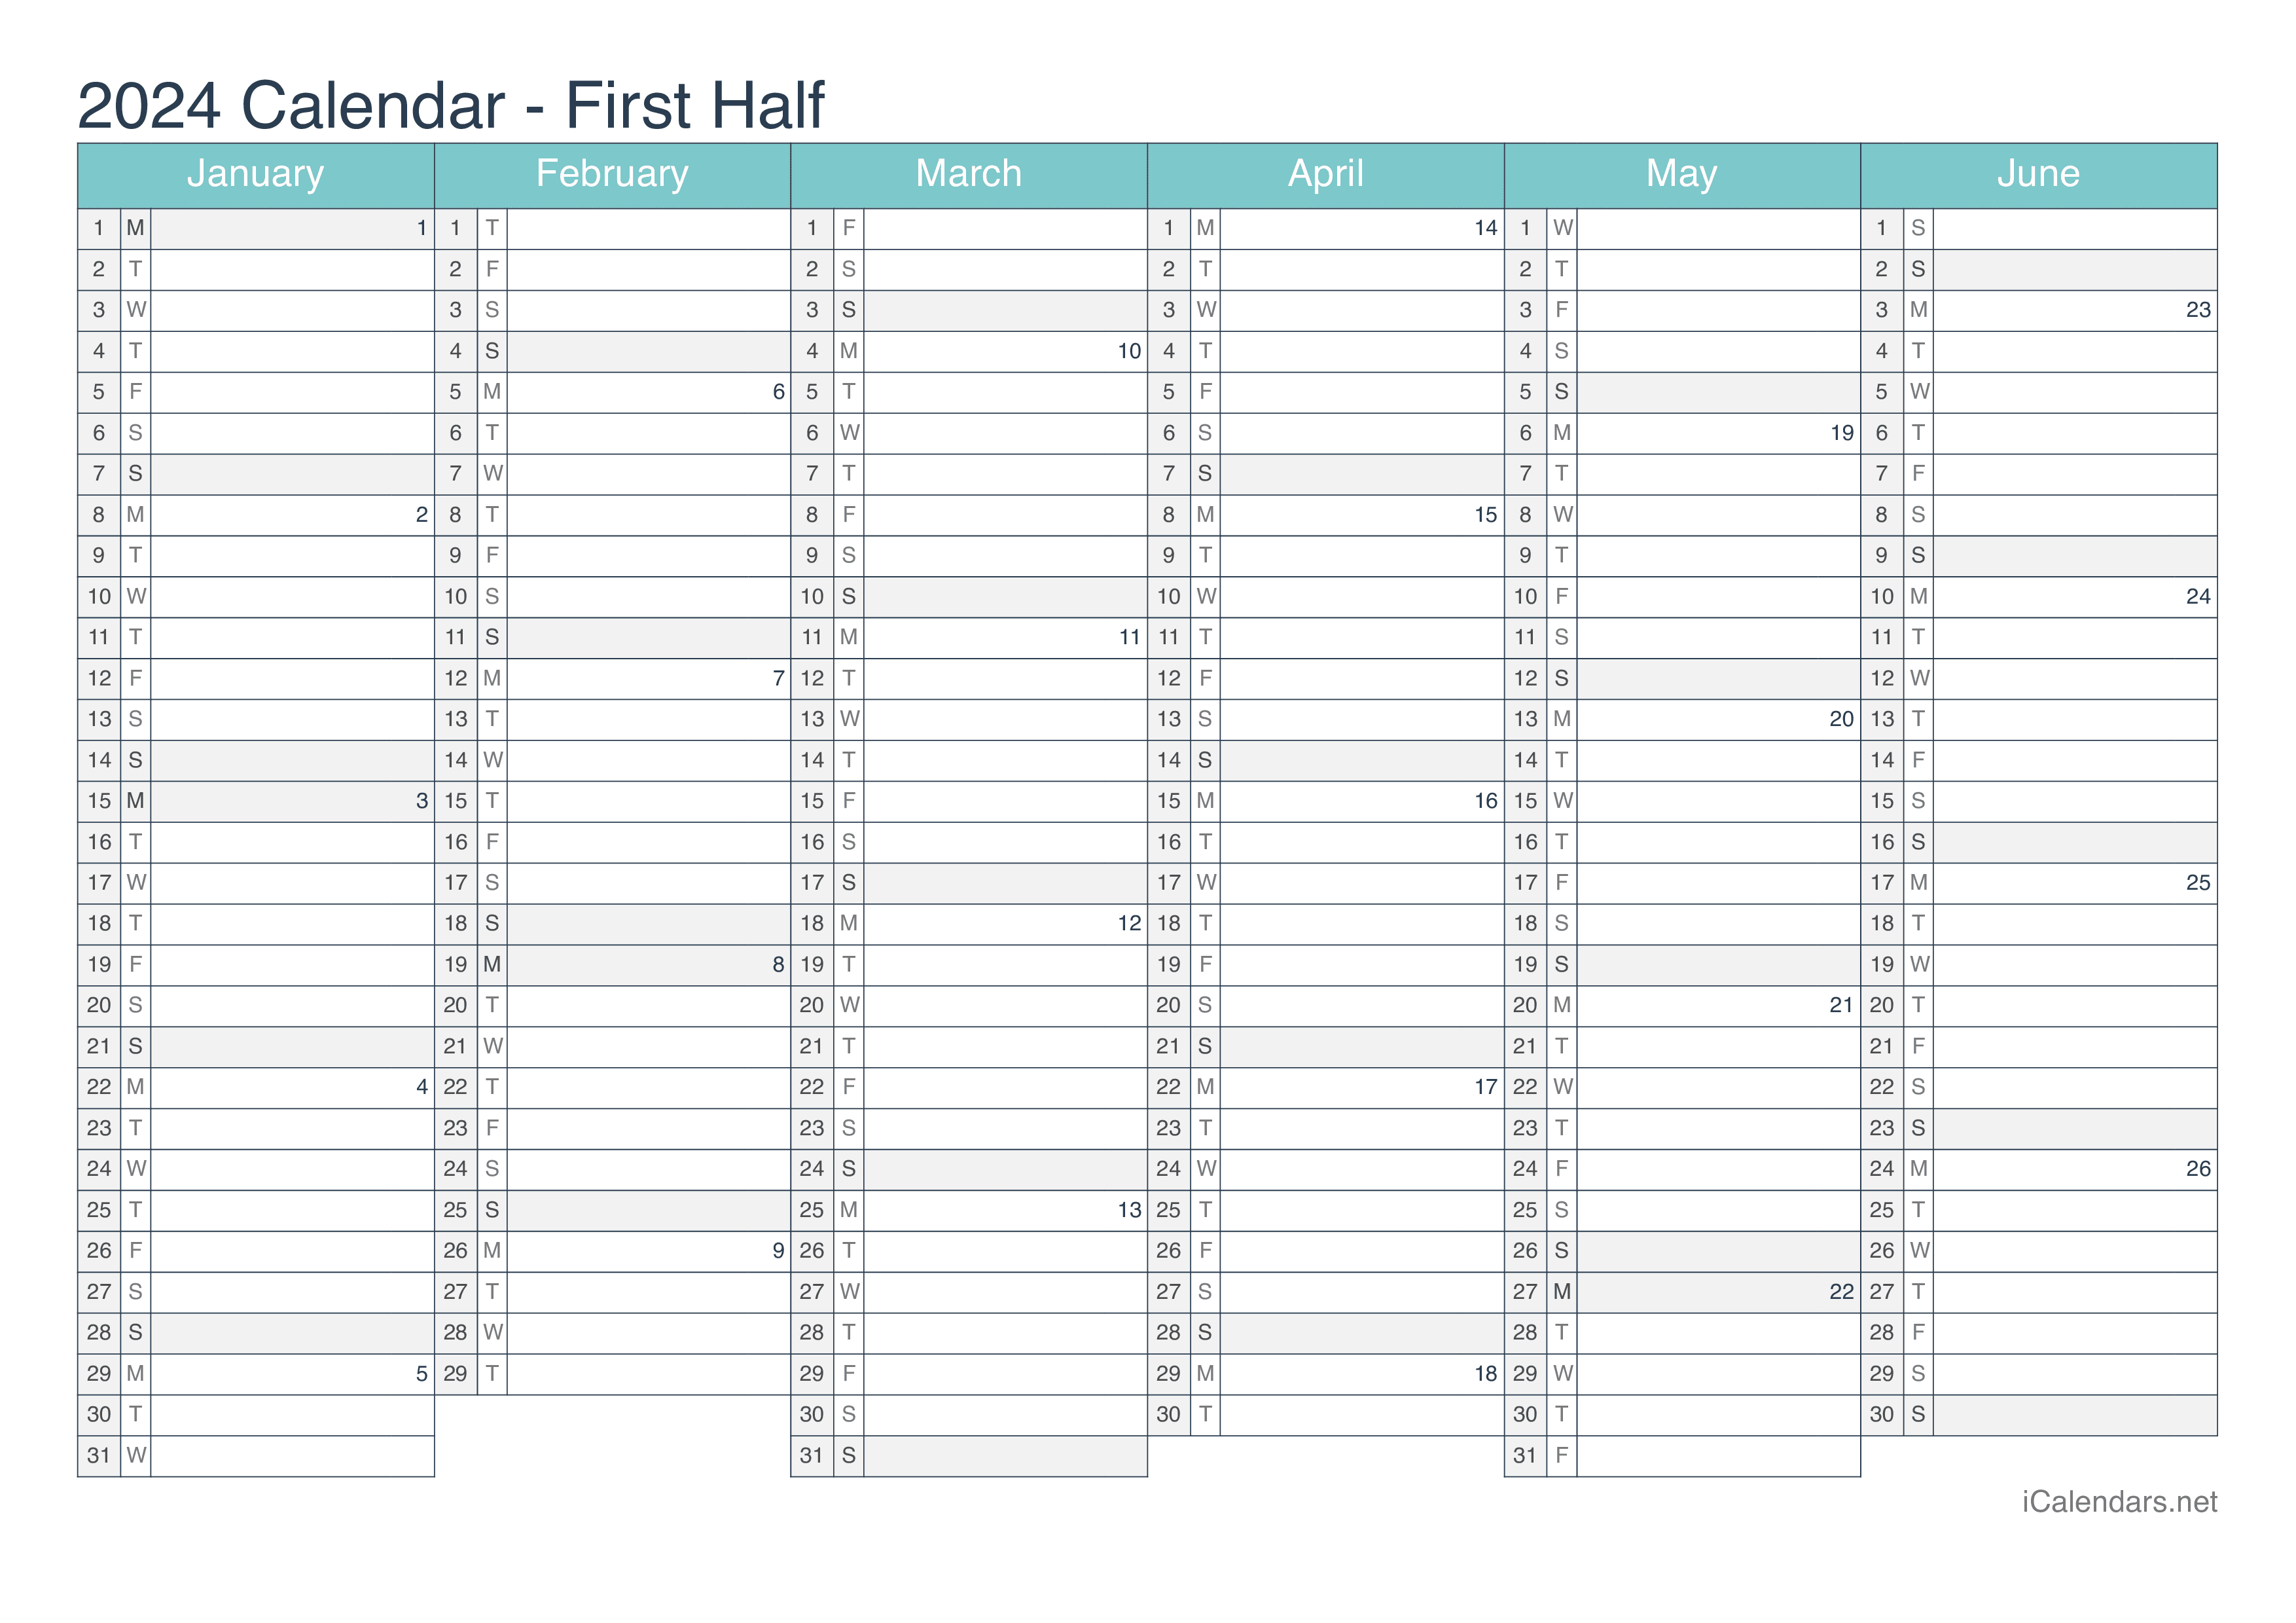 2024 Half year calendar with week numbers - Turquoise